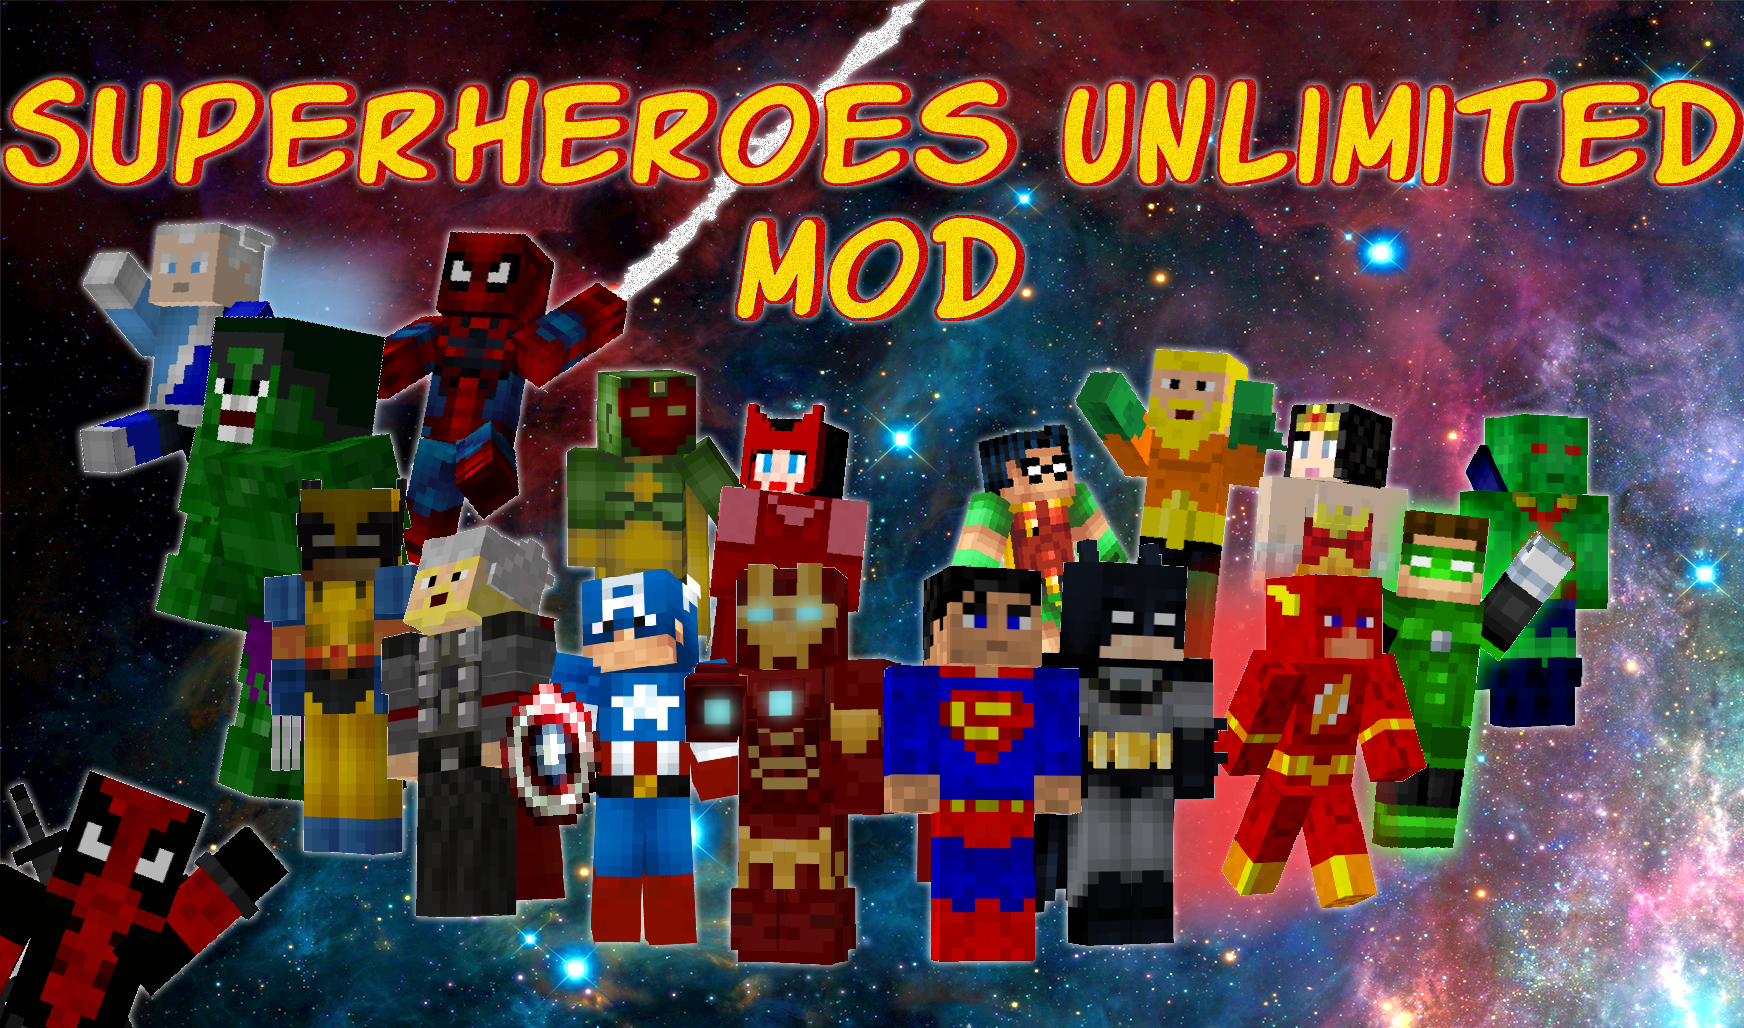 how to edit superheroes unlimited mod 1.7.10